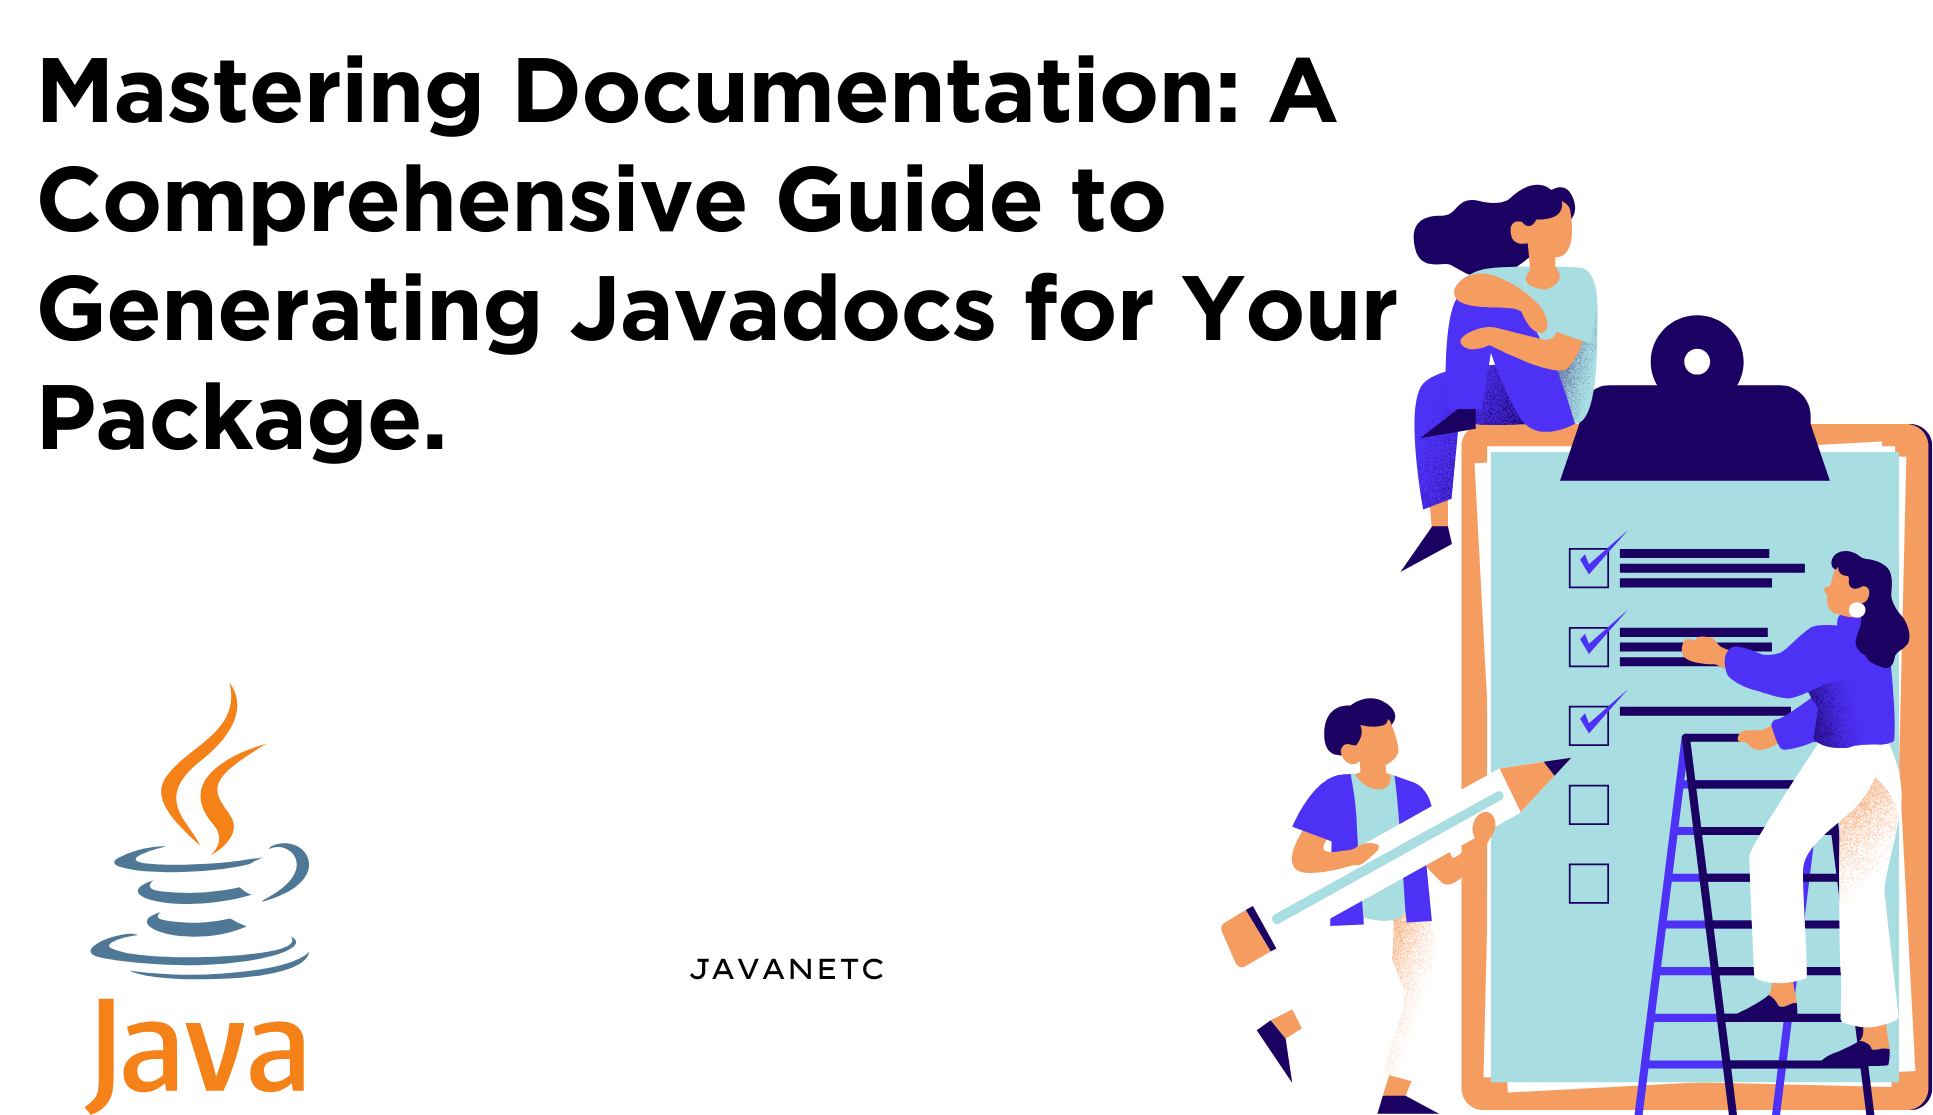 You are currently viewing Mastering Documentation: A Comprehensive Guide to Generating Javadocs for Your Package 2208